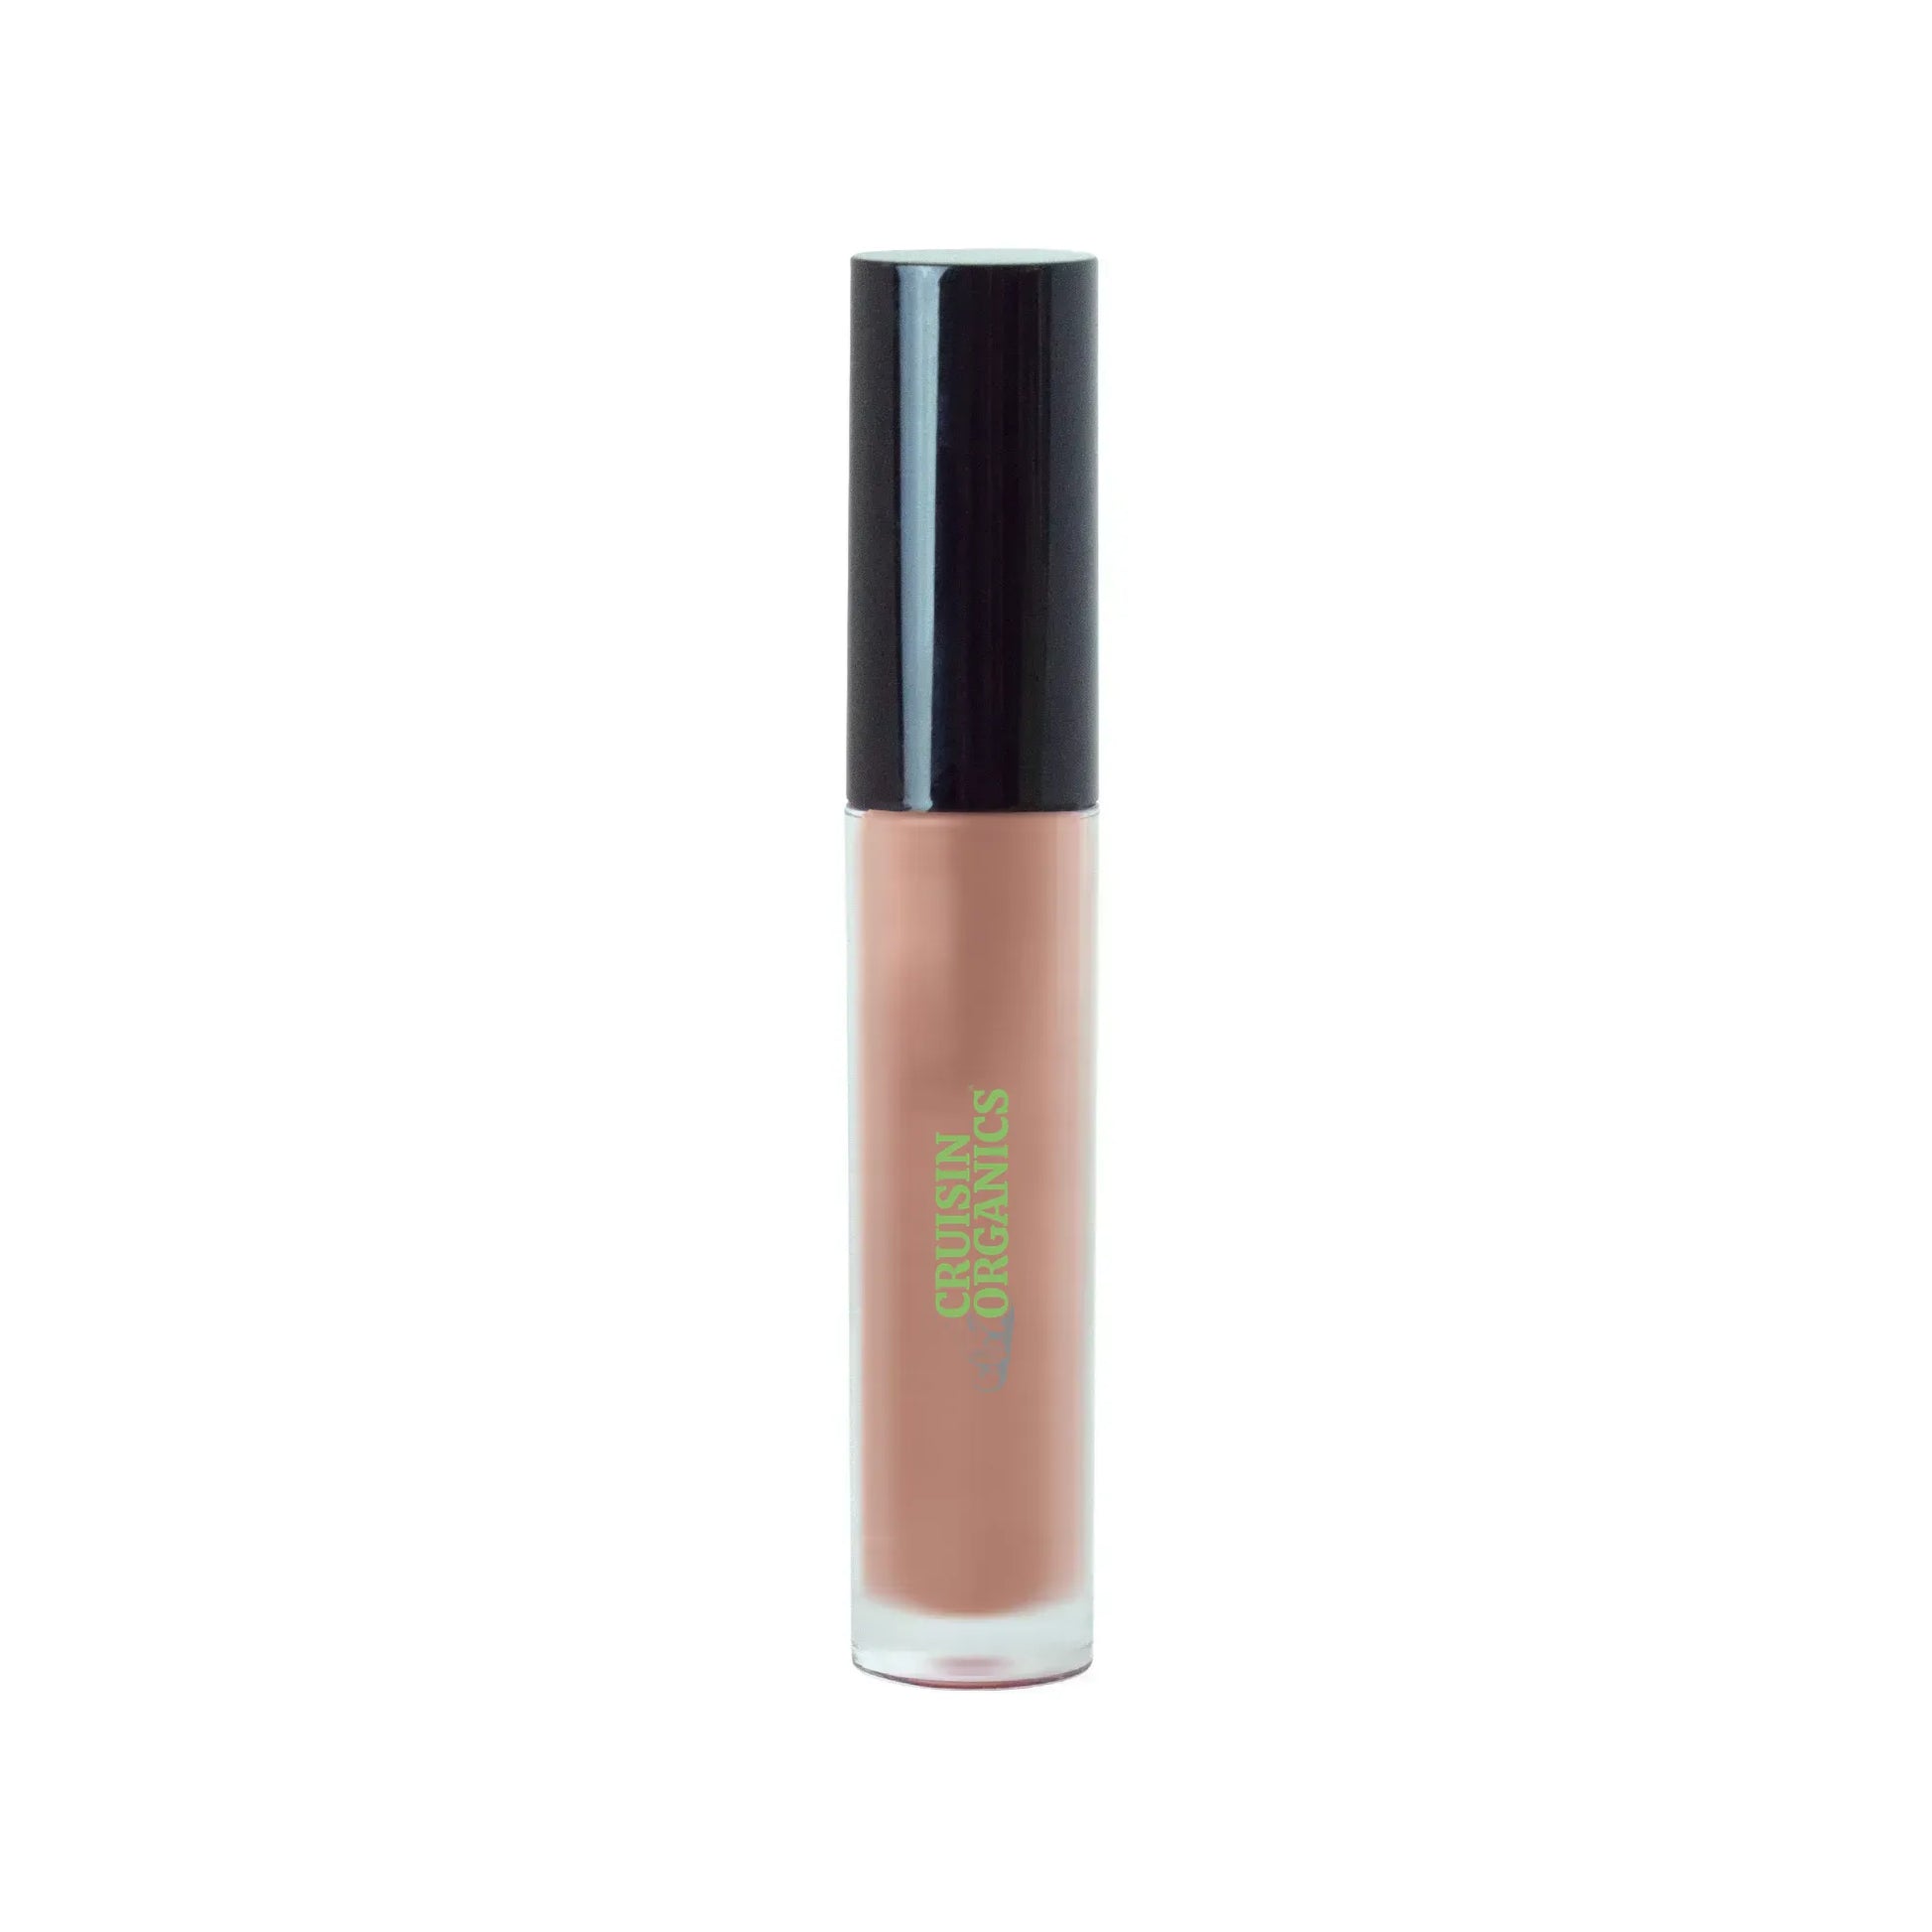 Take your gloss and brilliance to the next level with our Cruisin Orgaaics Nude liquid lip gloss. One swipe and your lips will look fuller with an illuminating shine. Our high impact, liquid lip gloss is formulated so you can have that effortless, brilliant gloss throughout the day or night. Add the shine and pigments you want with both shimmer and natural finish options. With a sheer tint, this liquid lip gloss’ shimmer will surely have you use it over and over again.